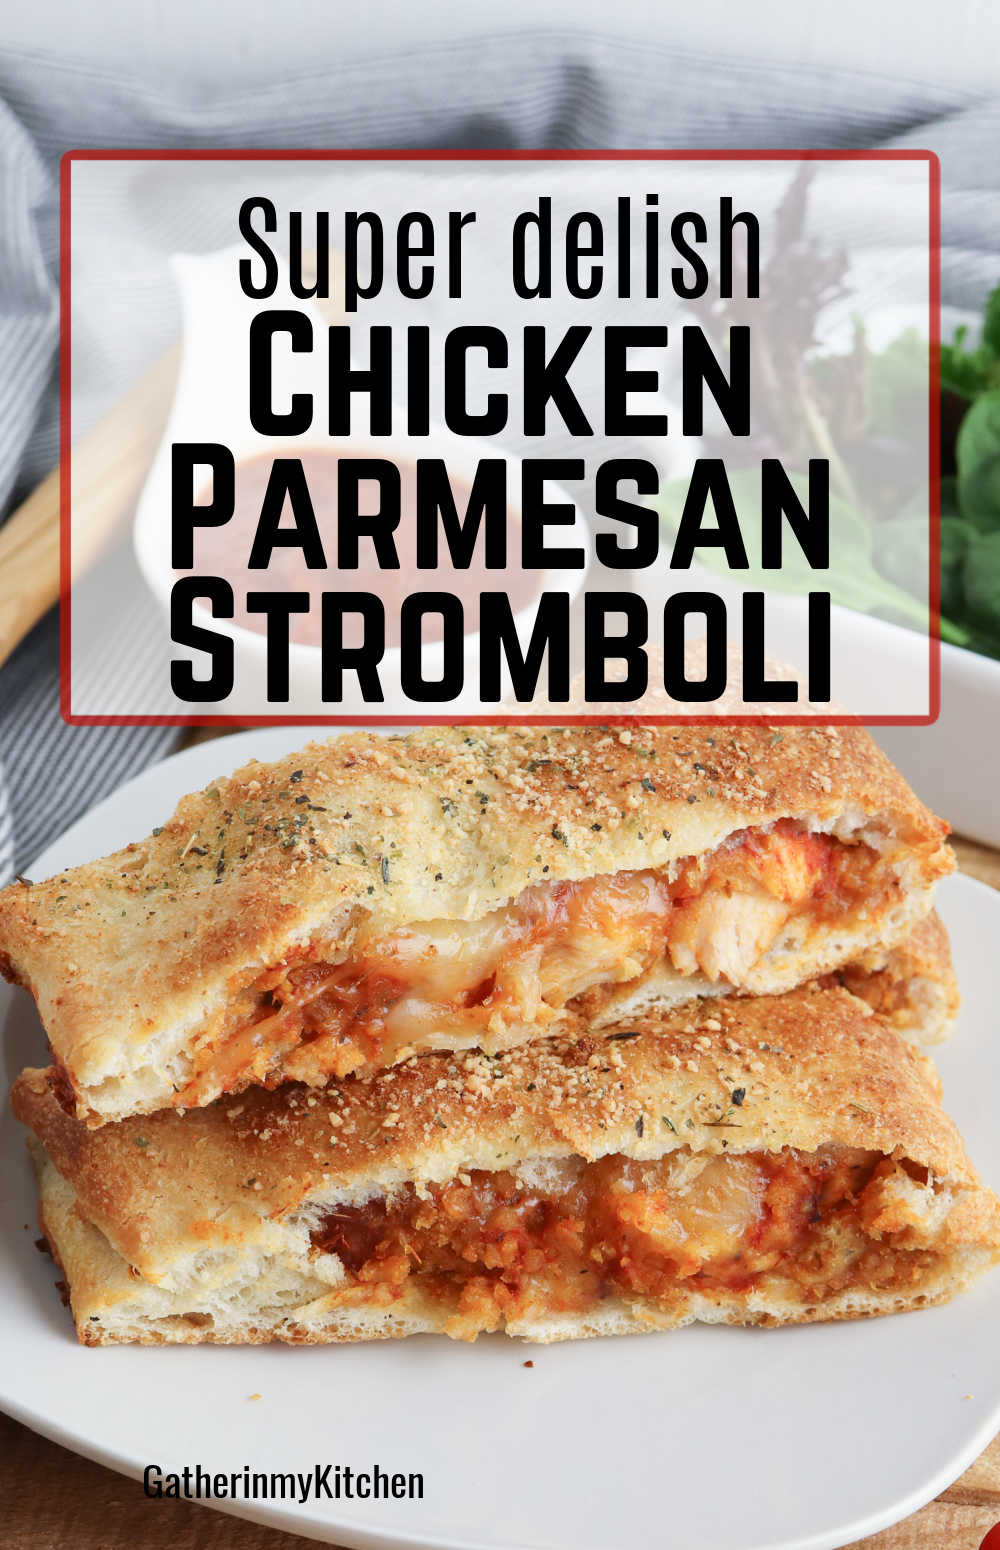 Pin image: stromboli on a plate with the words "super delish chicken parmesan stromboli" in a box near the top of the image.